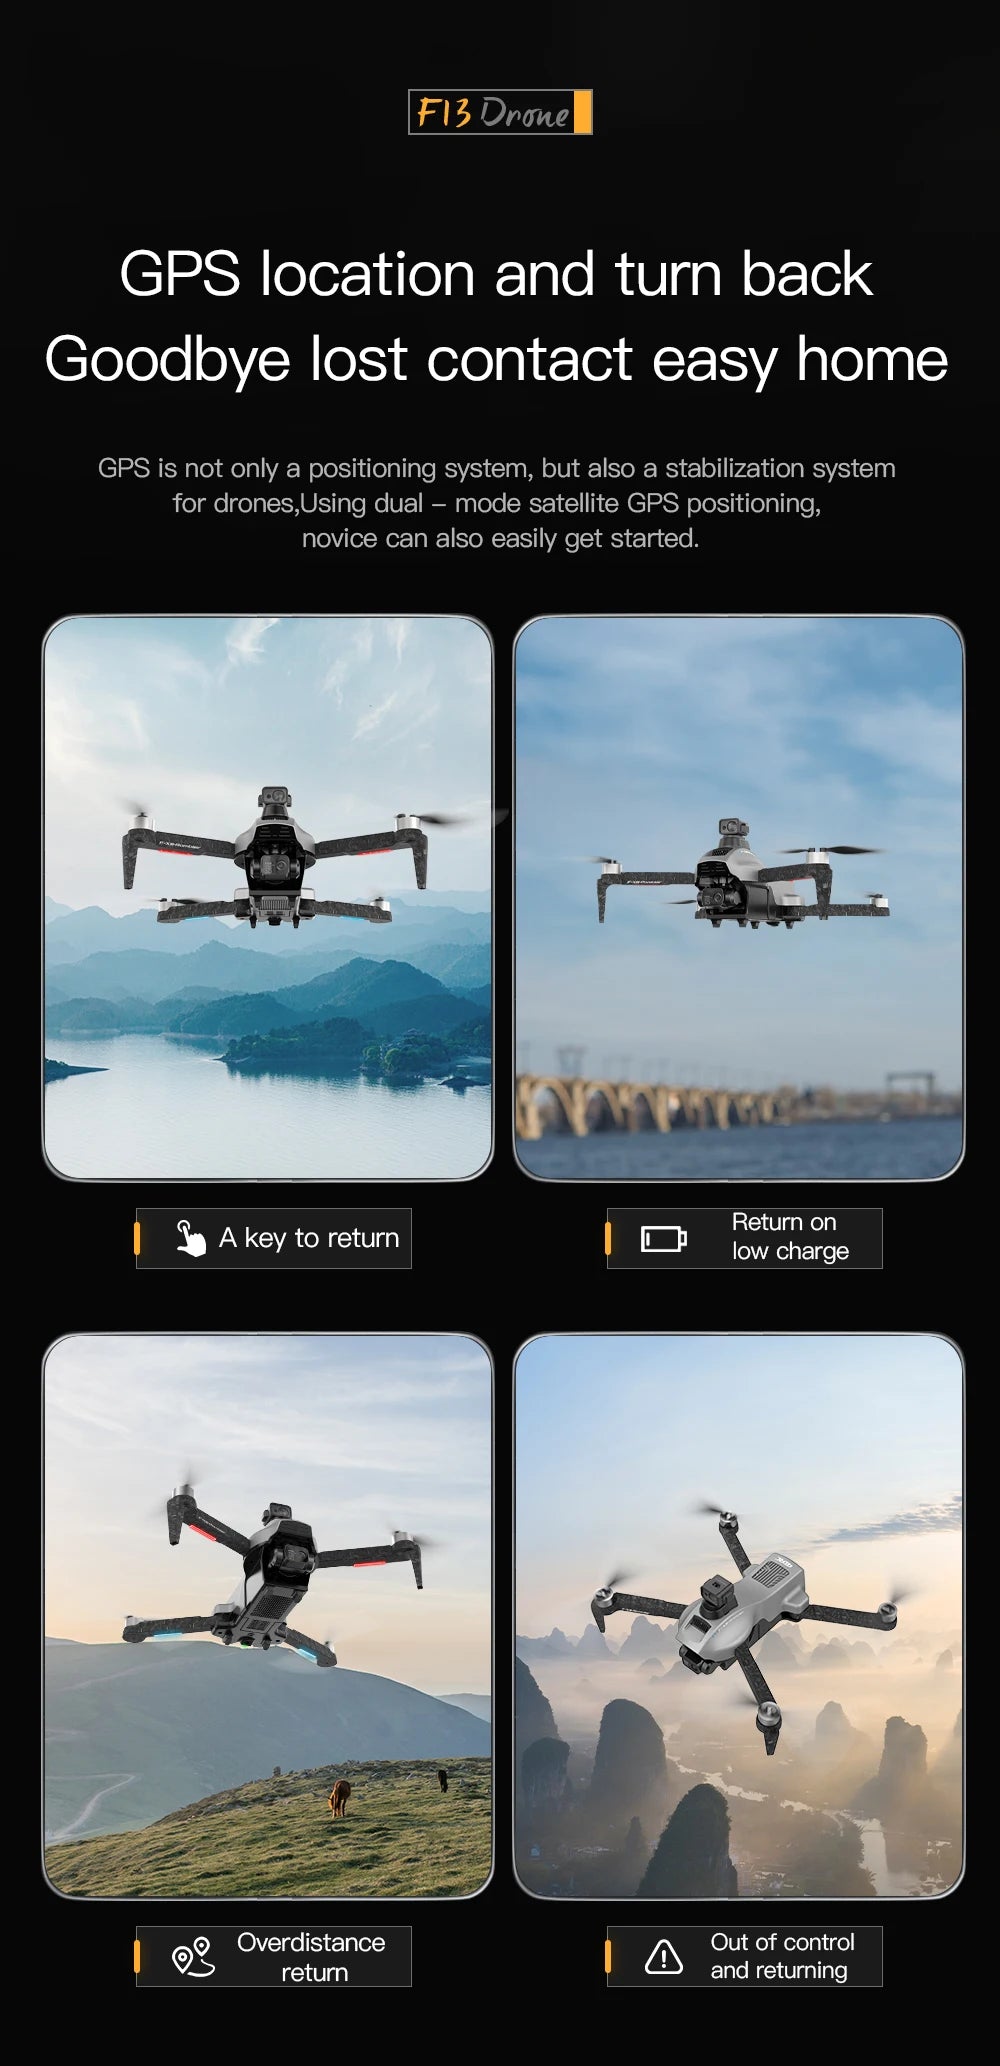 F13 Drone, easy home GPS is not only a positioning system; but also a stabilization system for